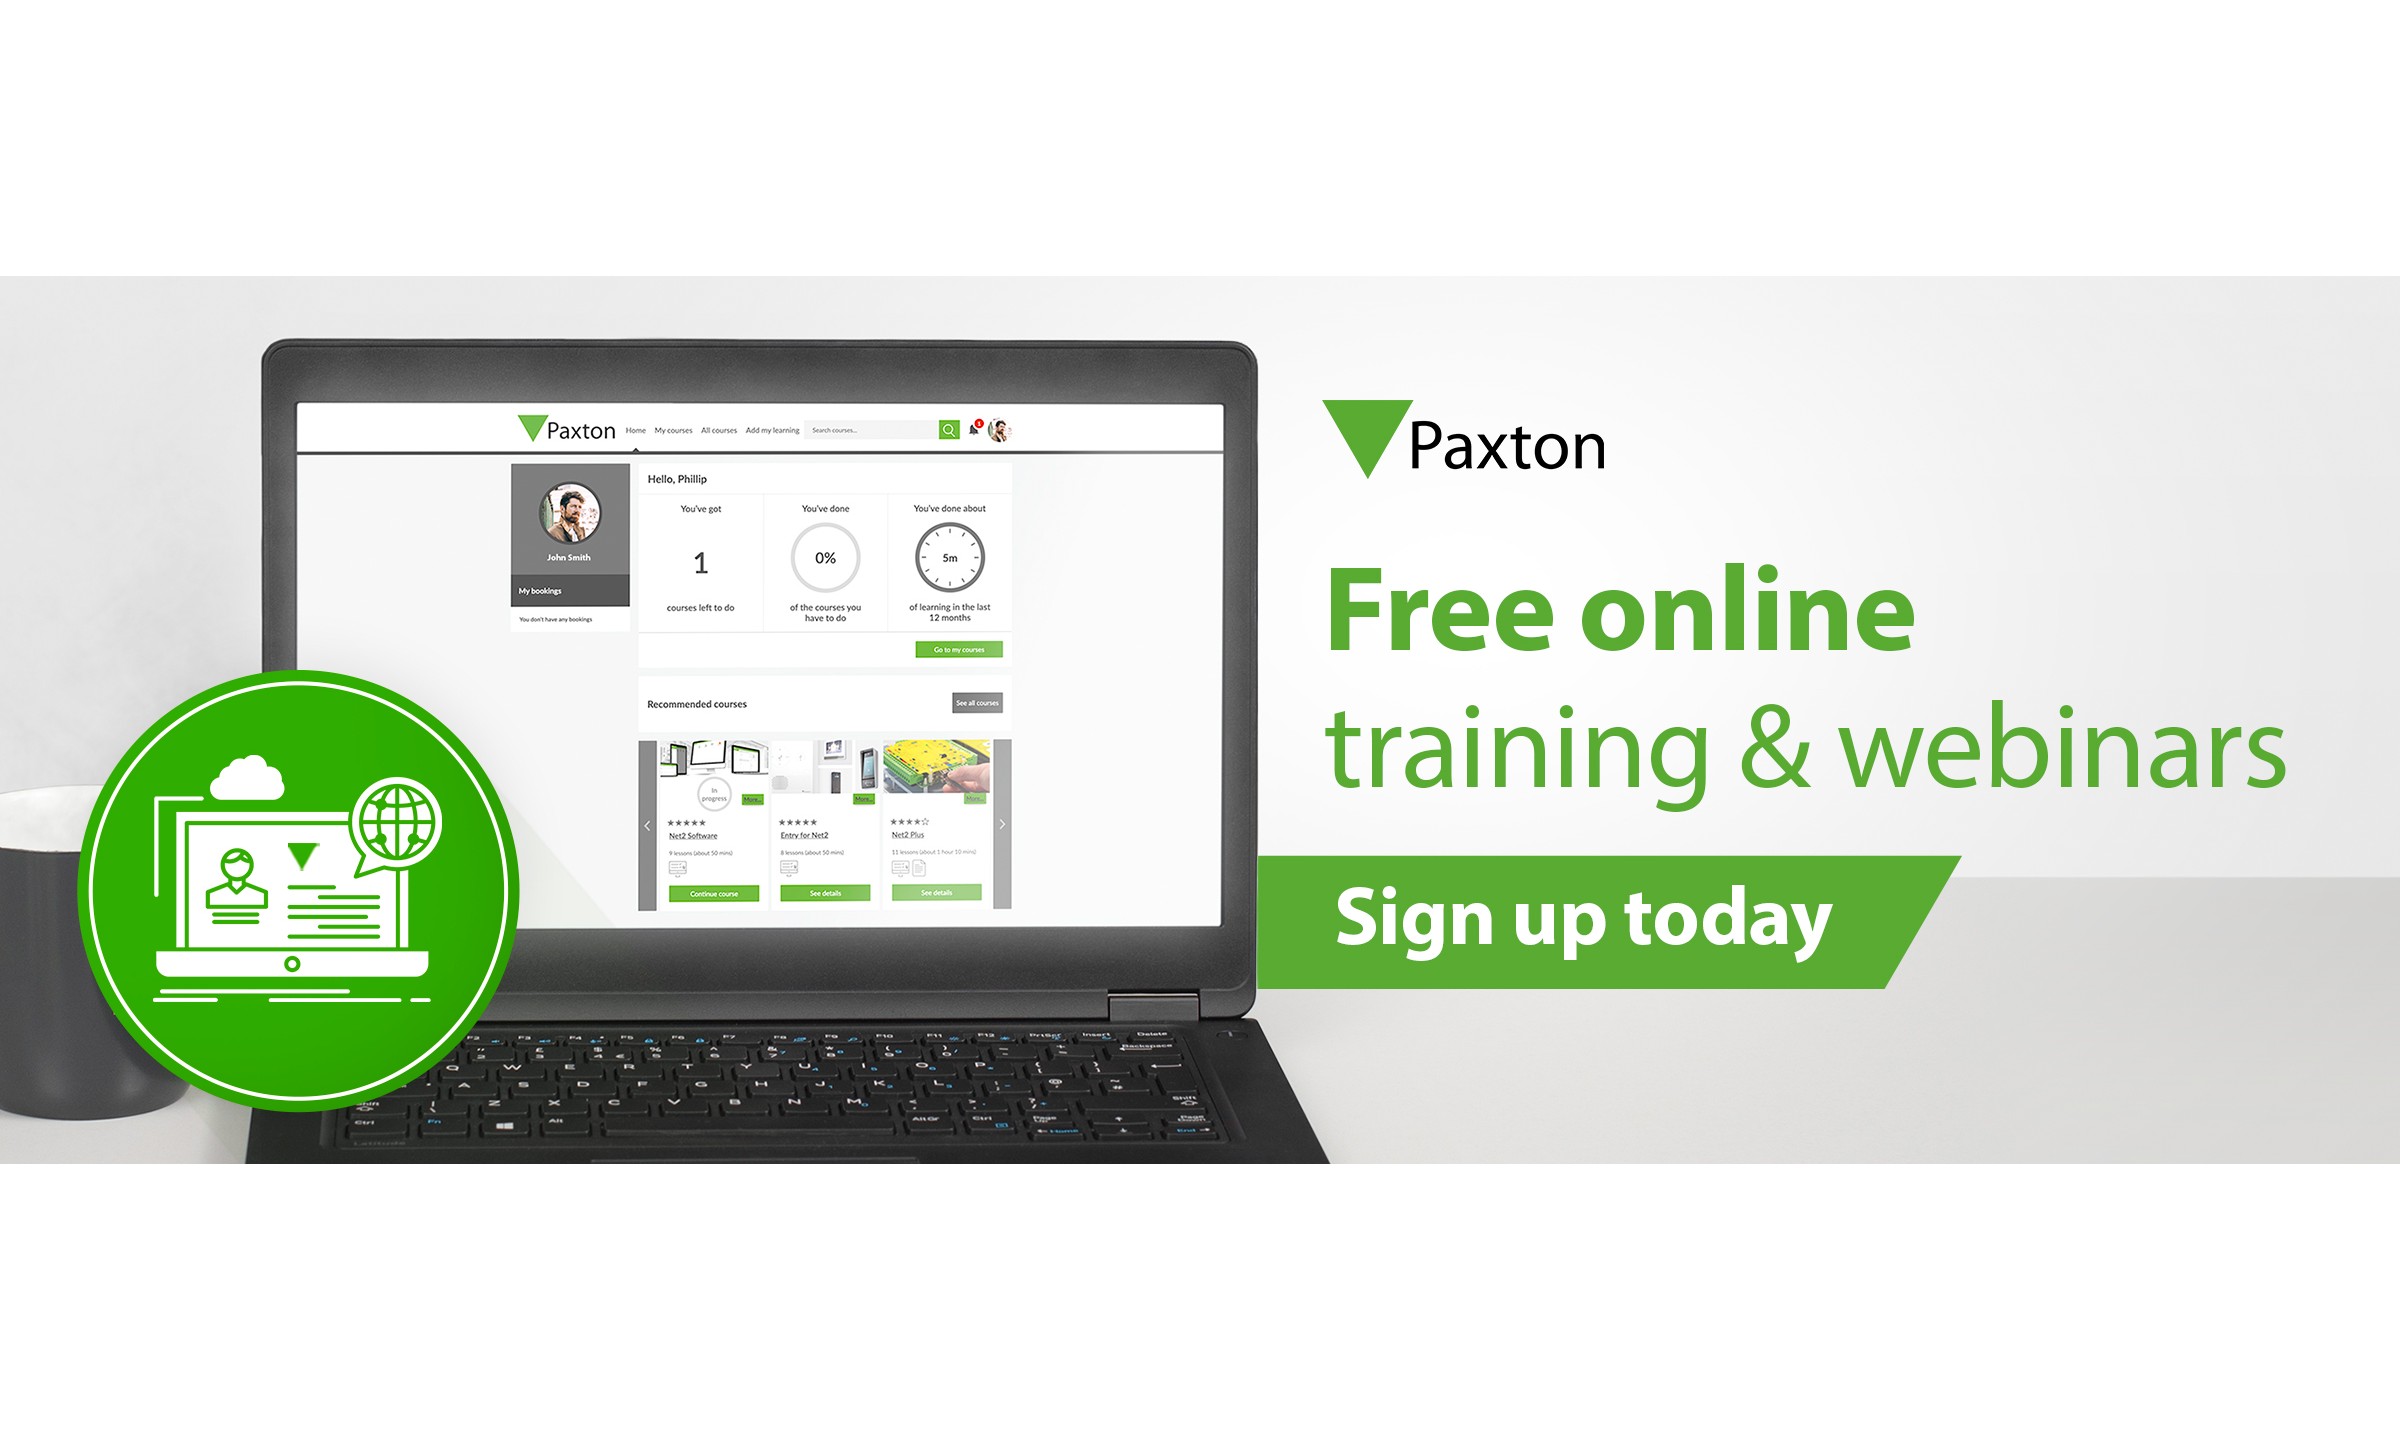 Paxton expands online training platform & launches free webinars